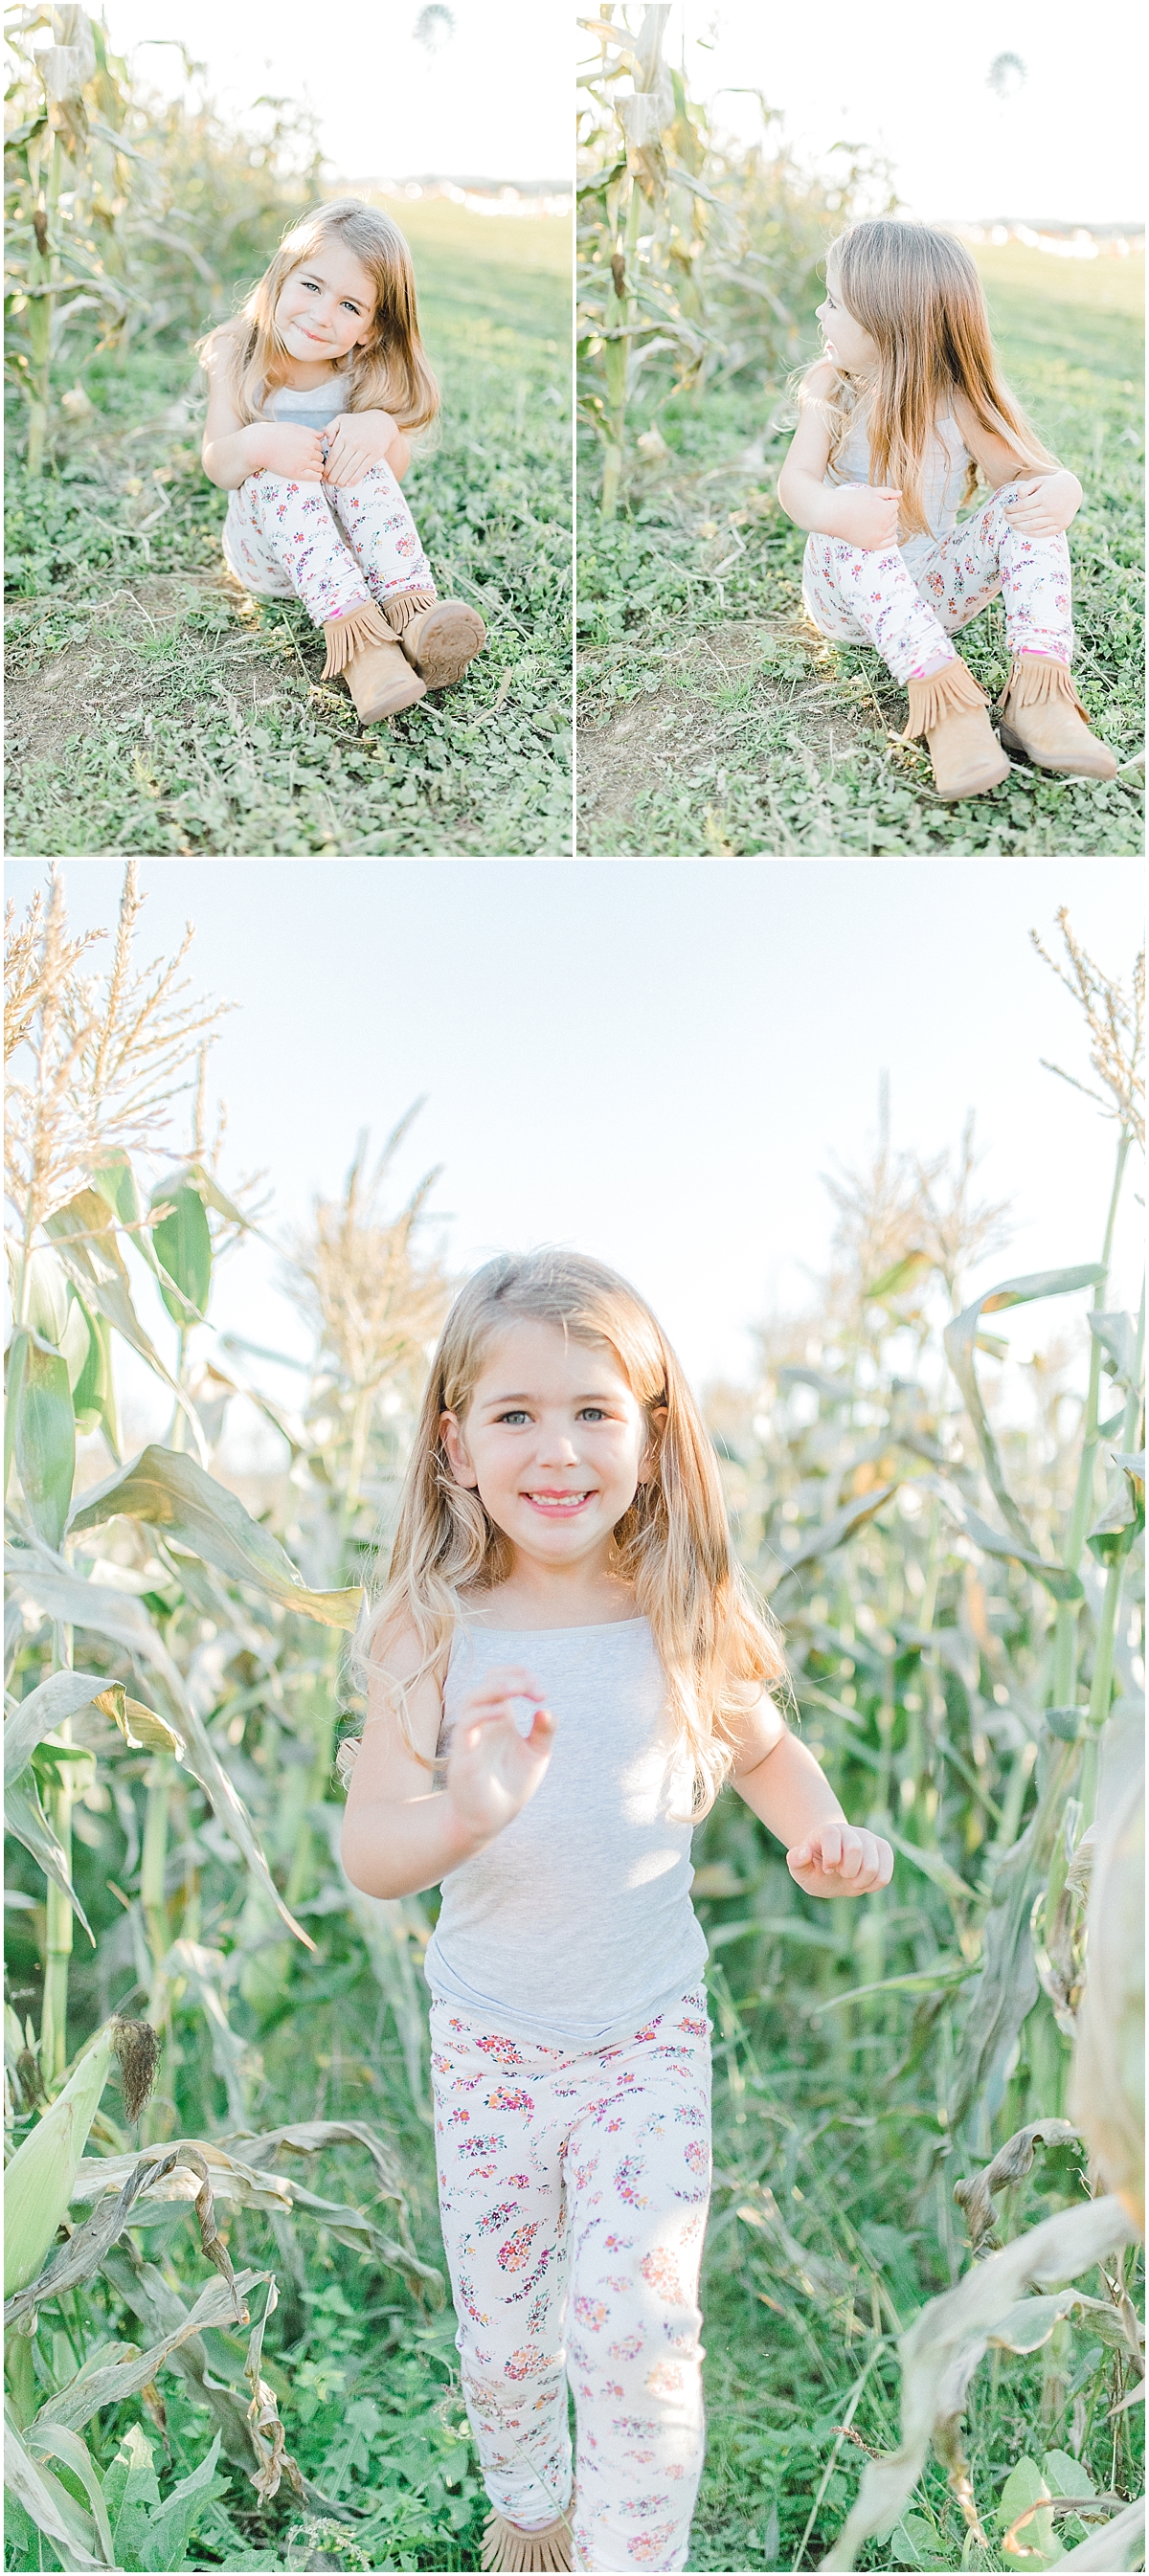 Pumpkin Patch Photo Shoot With Toddler and Mommy | Emma Rose Company Seattle Portland Light and Airy Wedding Photographer | Kindred Presets | Film_0010.jpg